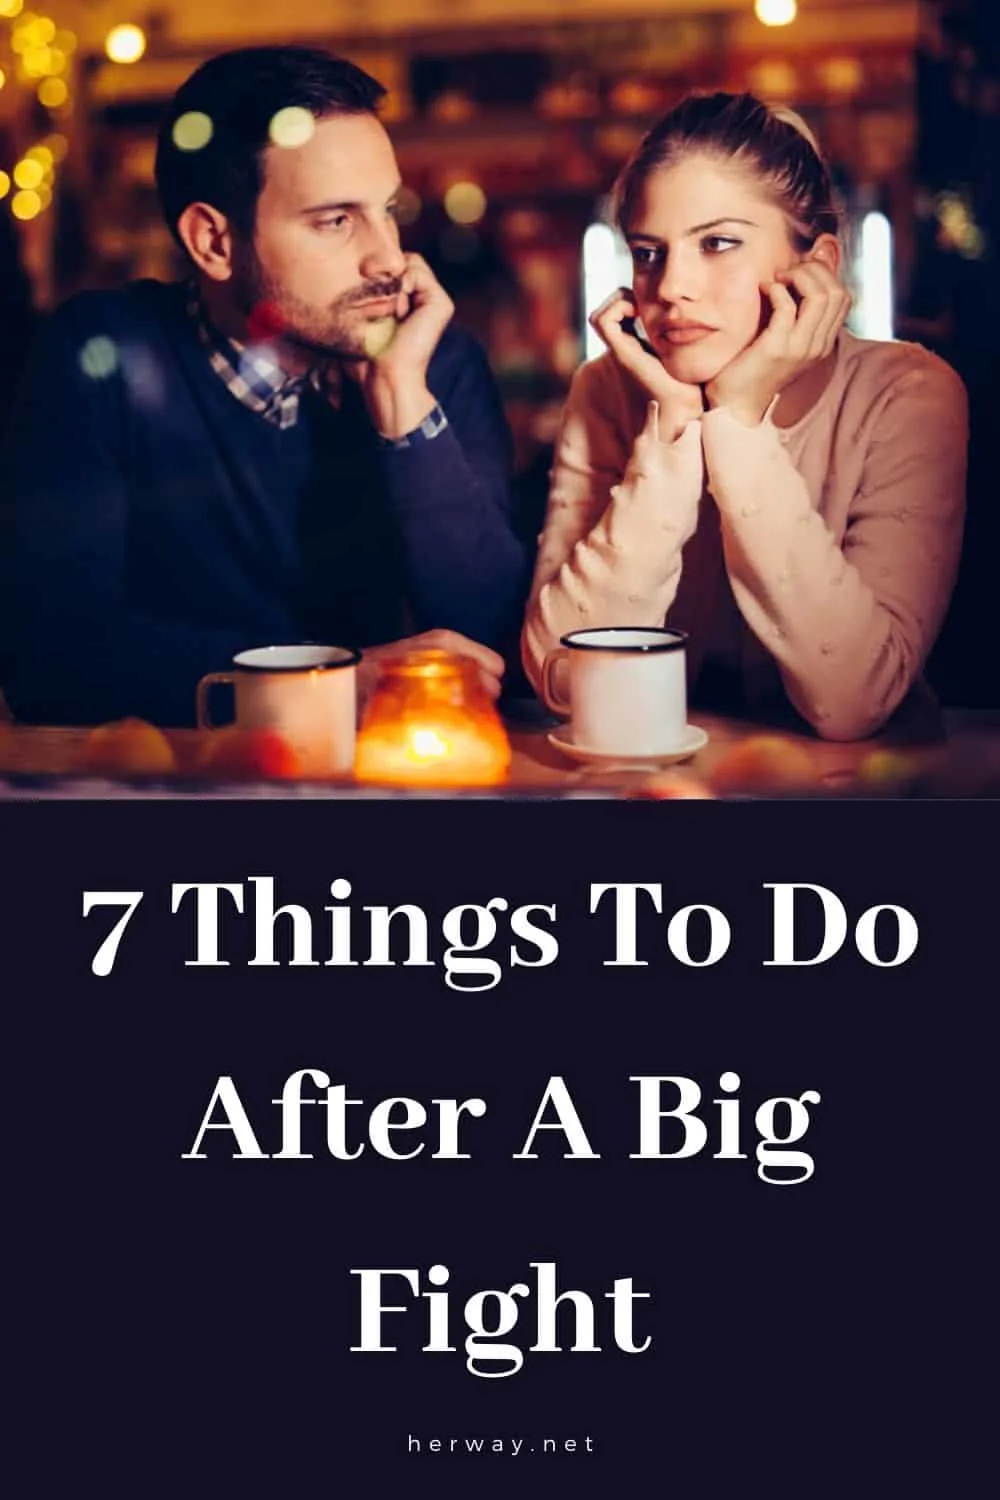 7 Things To Do After A Big Fight